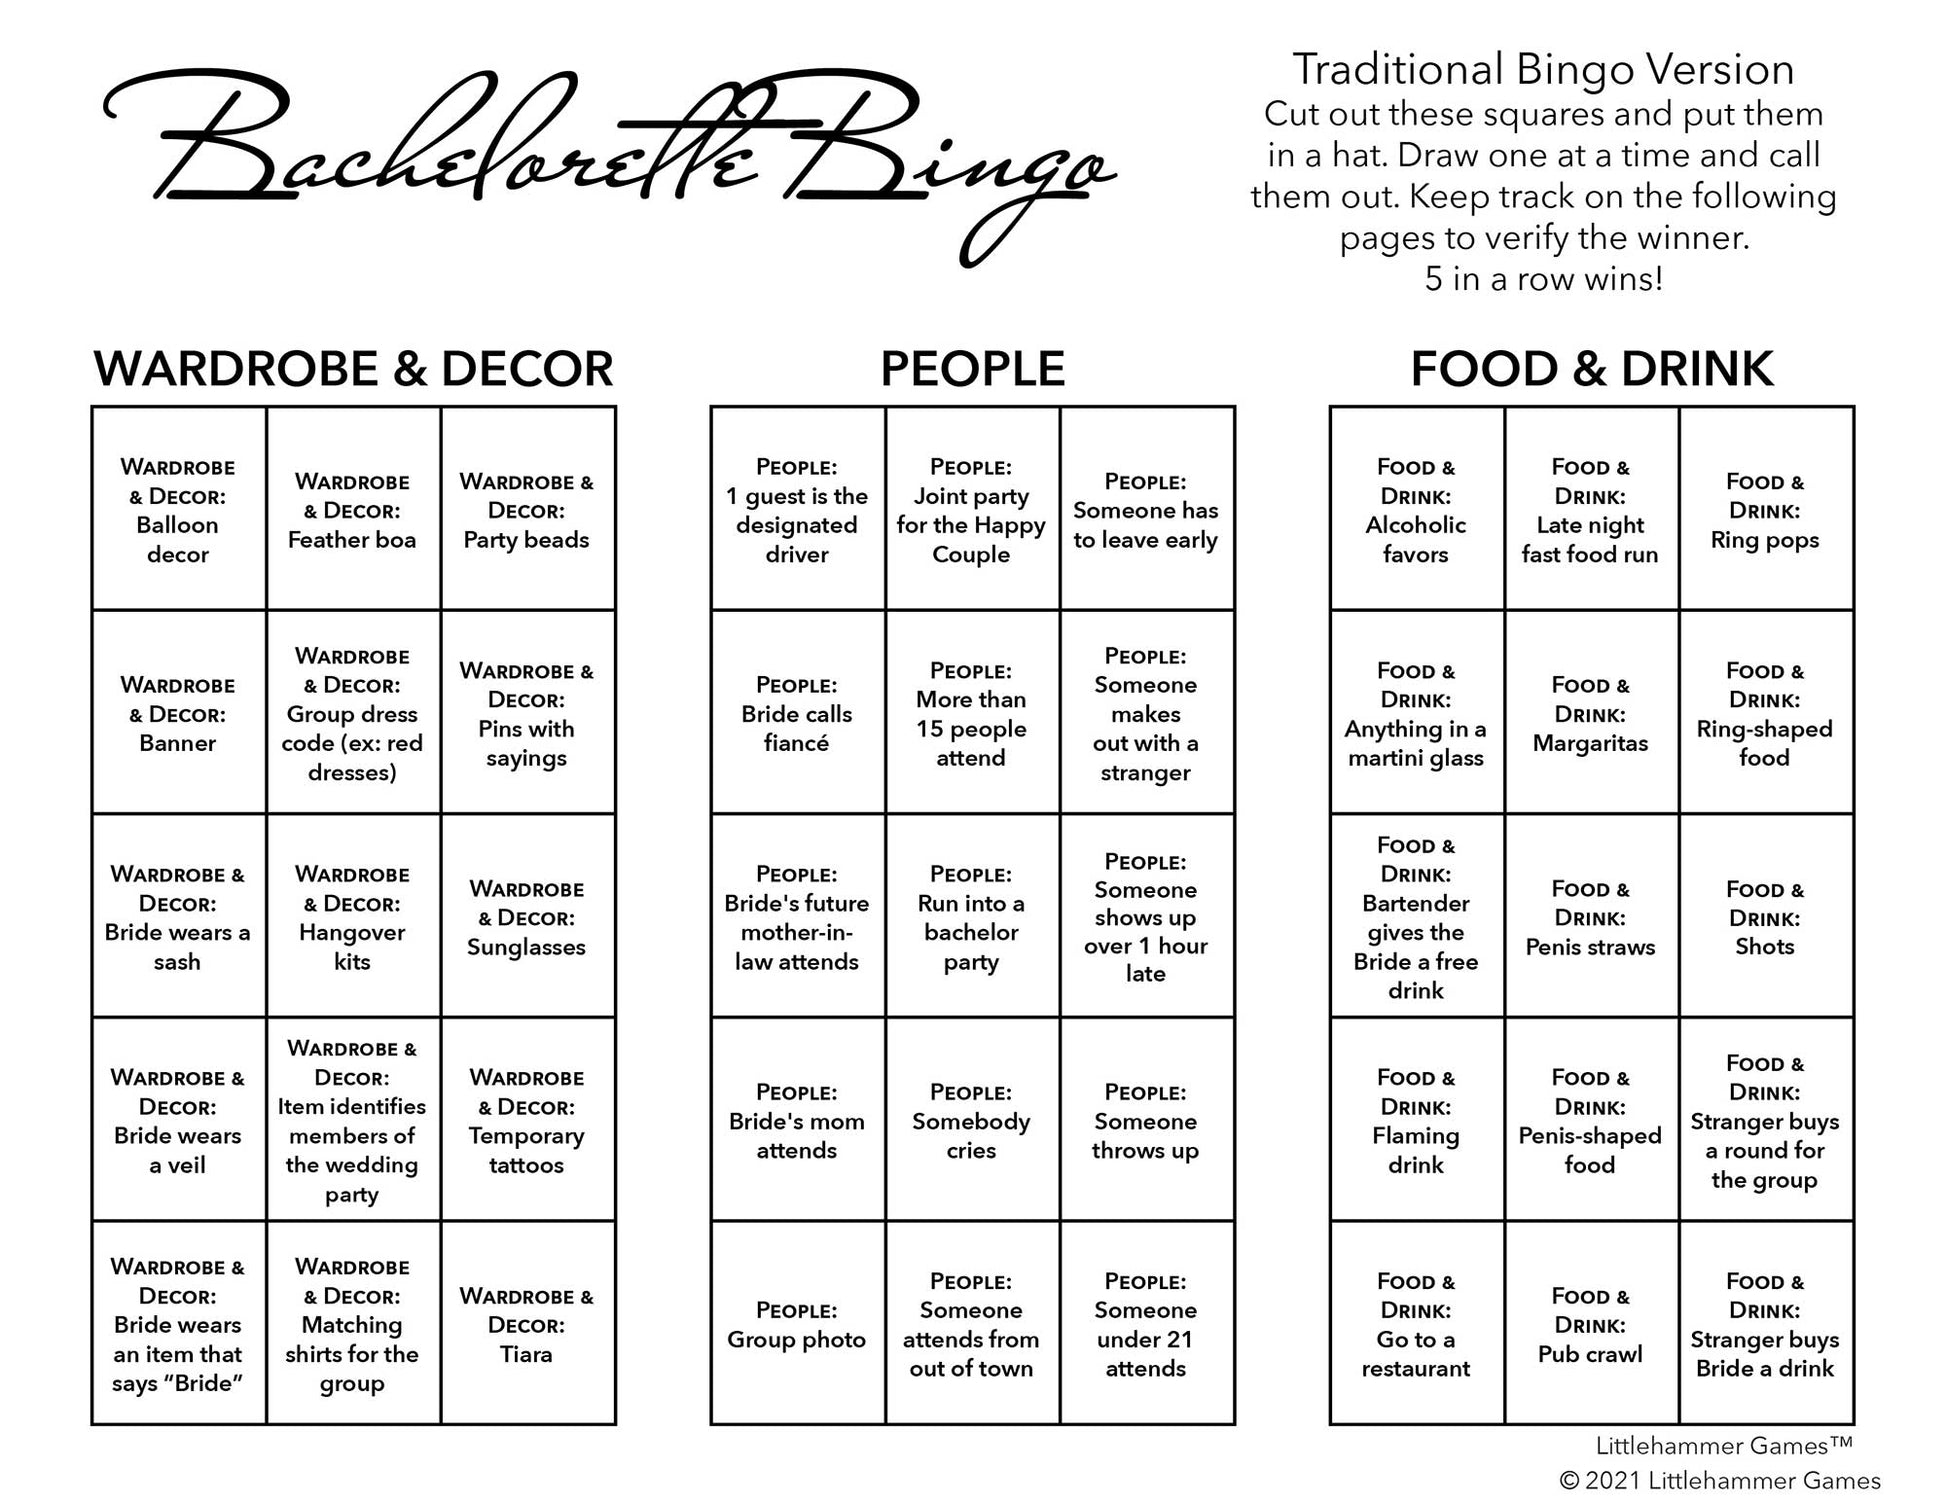 Bachelorette Bingo calling card with black text on a white background